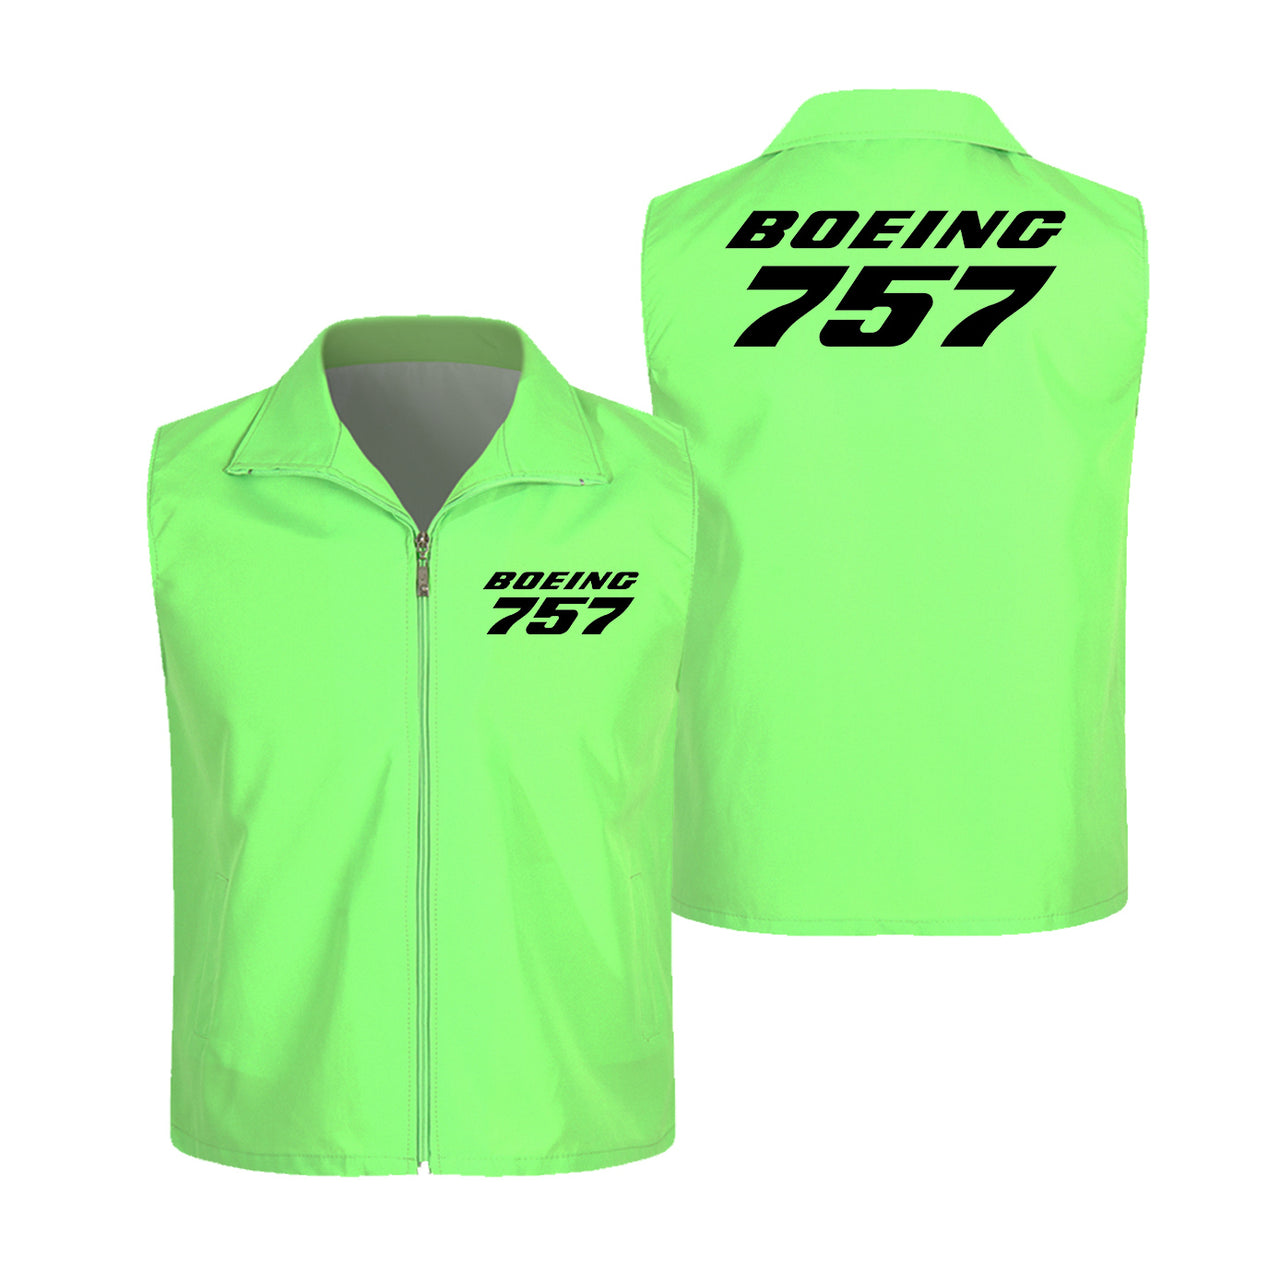 Boeing 757 & Text Designed Thin Style Vests